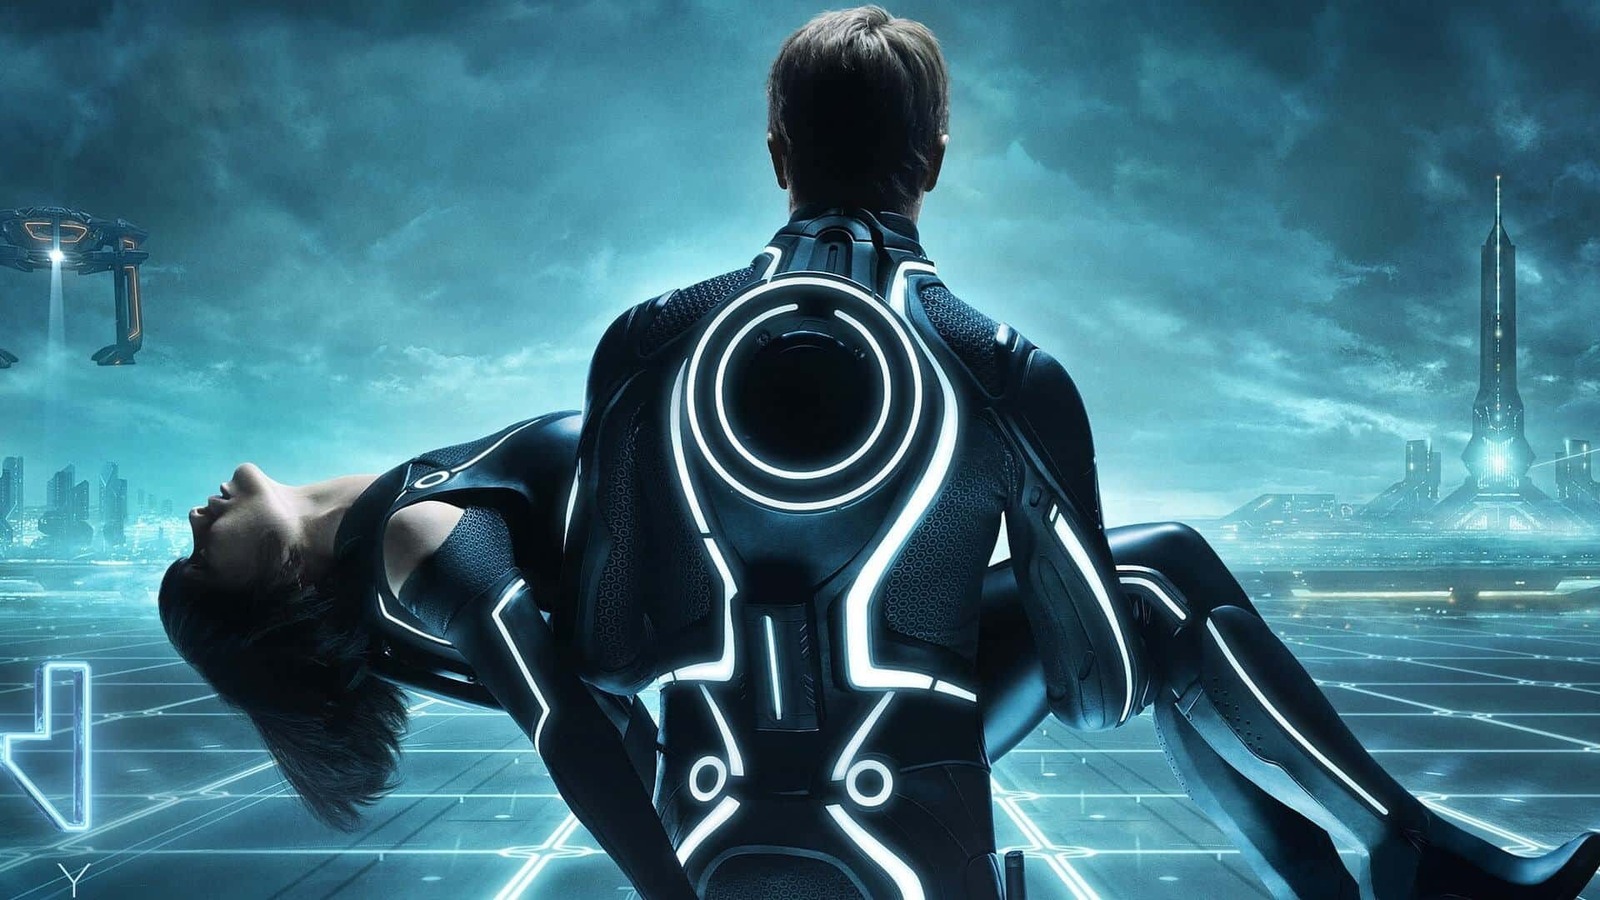 Here's Why Tron: Legacy Deserves More Love